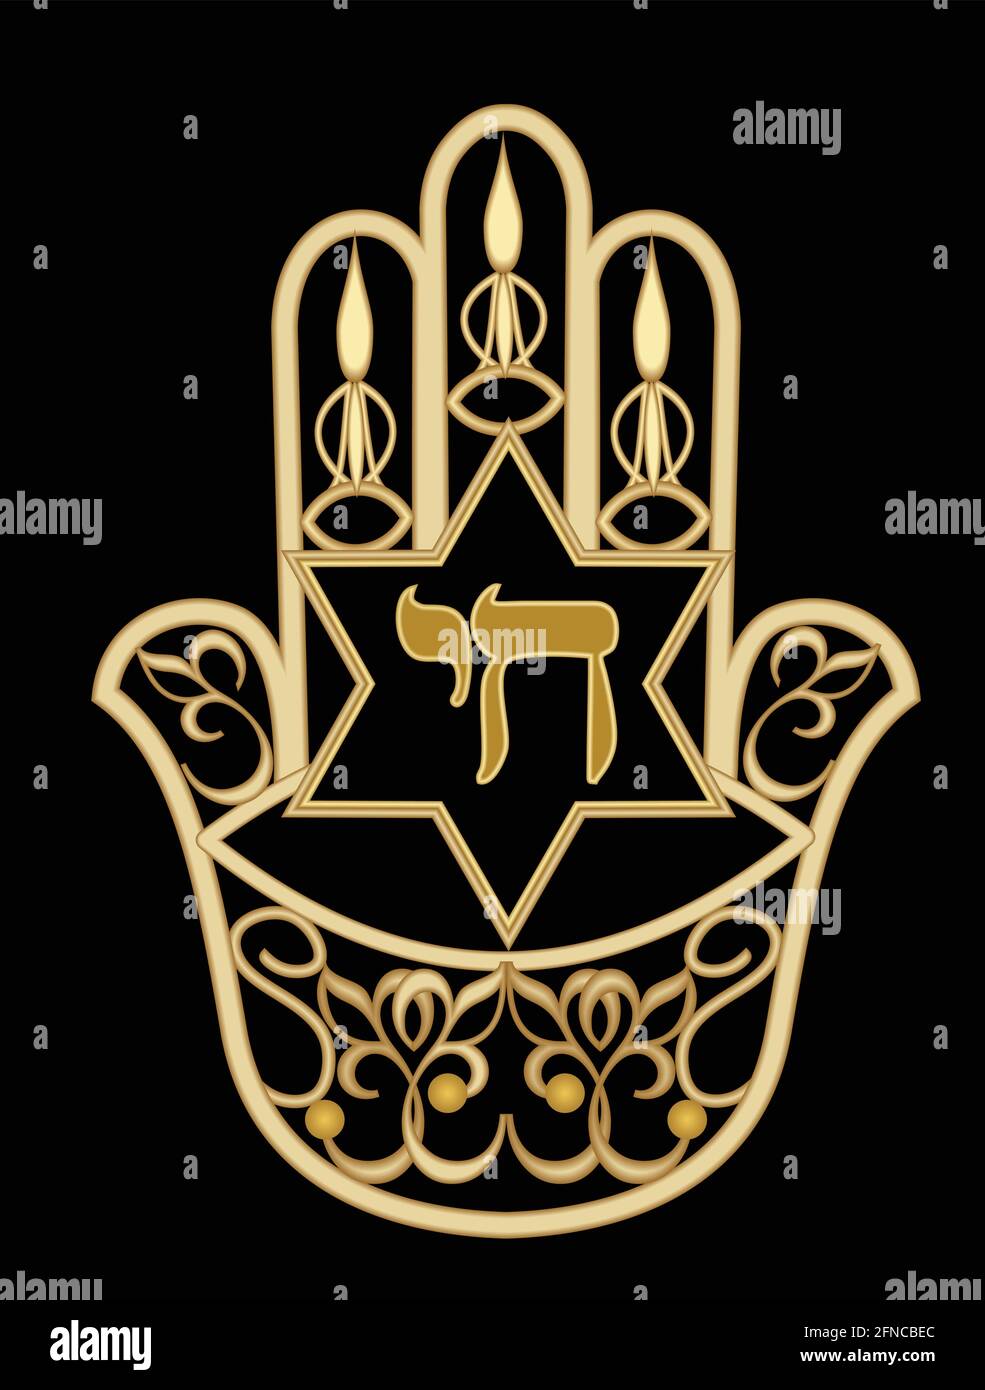 Miriam hand symbol hamsa. Golden design with star of David and hebrew word chai meaning life. Filigree gold jewel with jewish elements, Vector EPS 10 Stock Vector